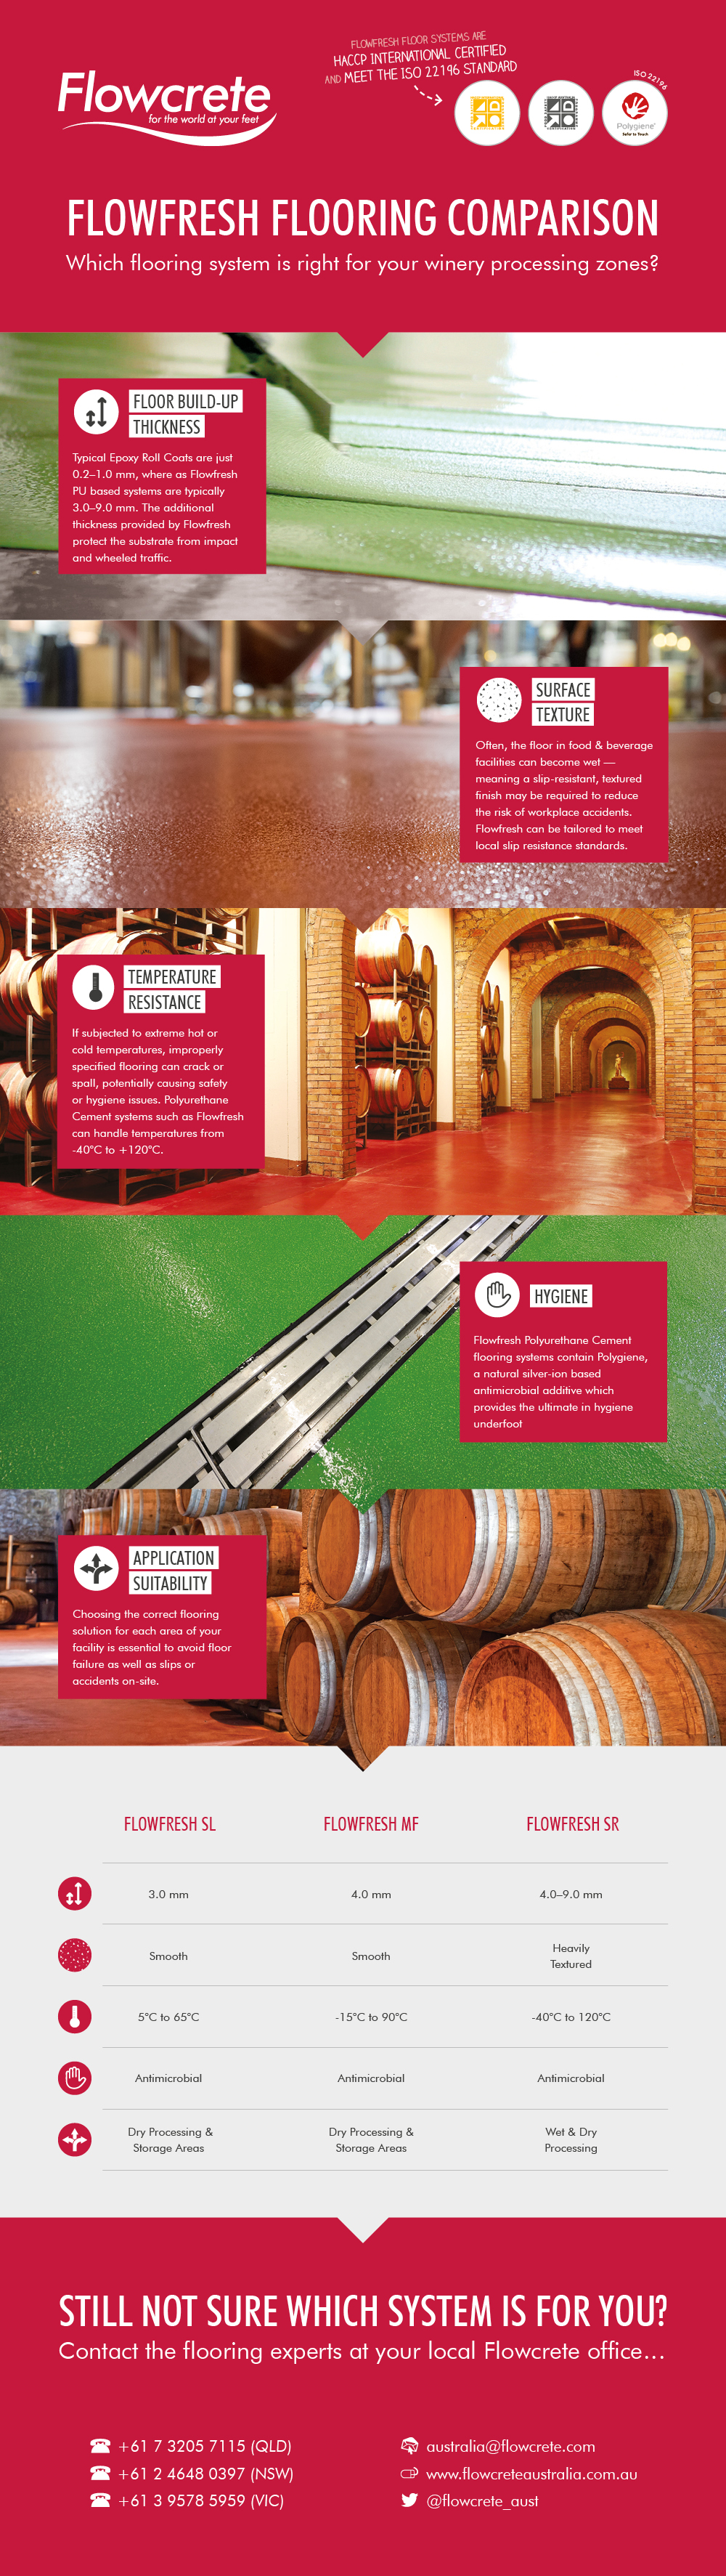 Which Flooring System is Right for Your Winery Processing Zone?